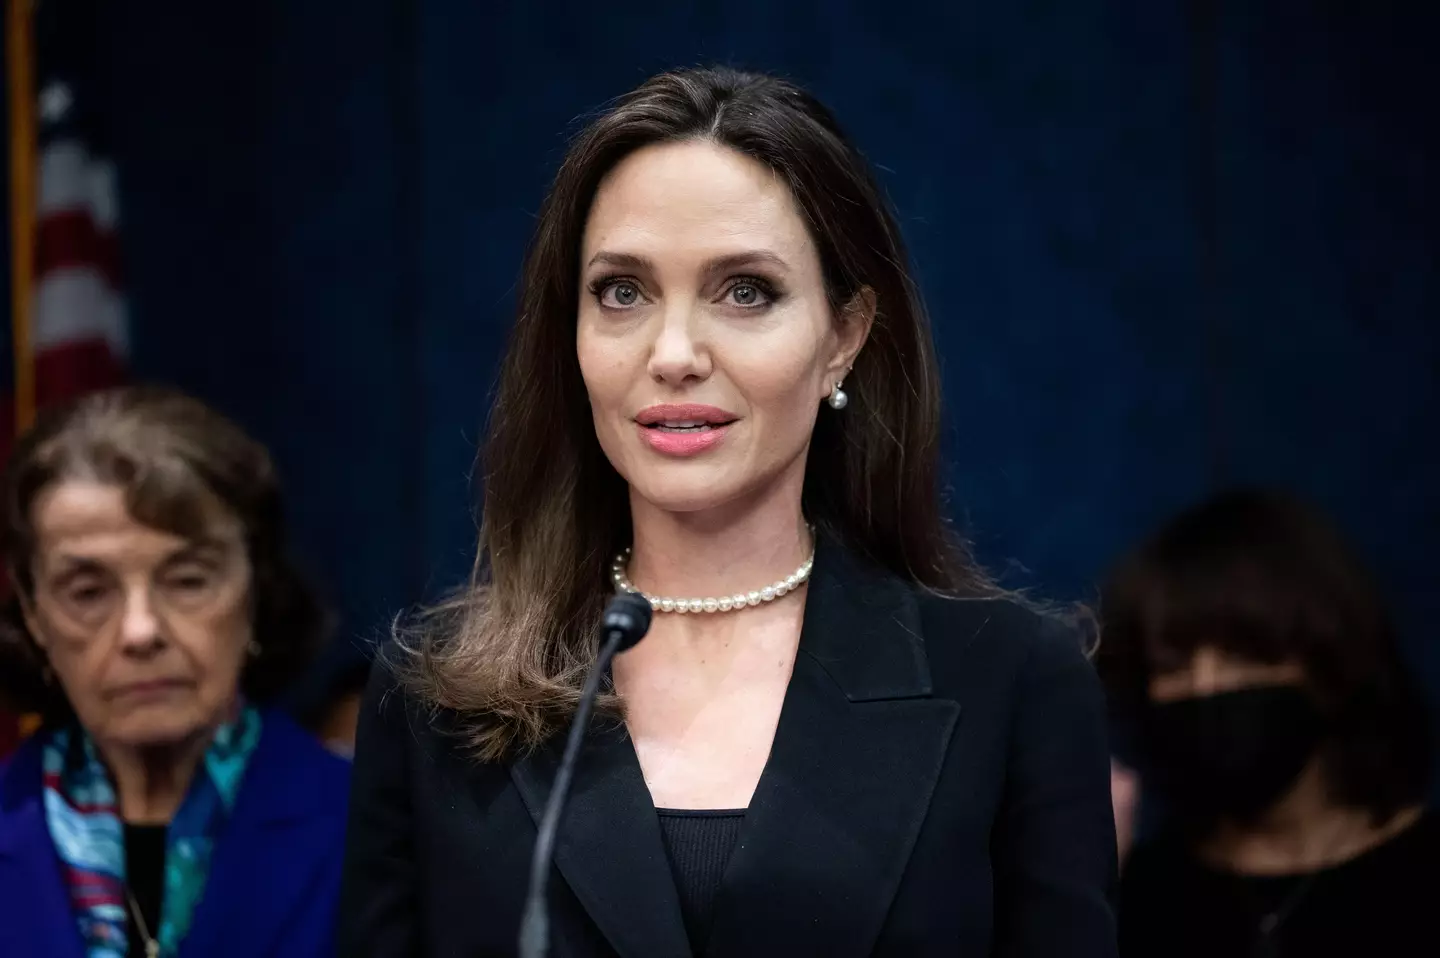 Jolie is an envoy for the United Nations refugee agency.